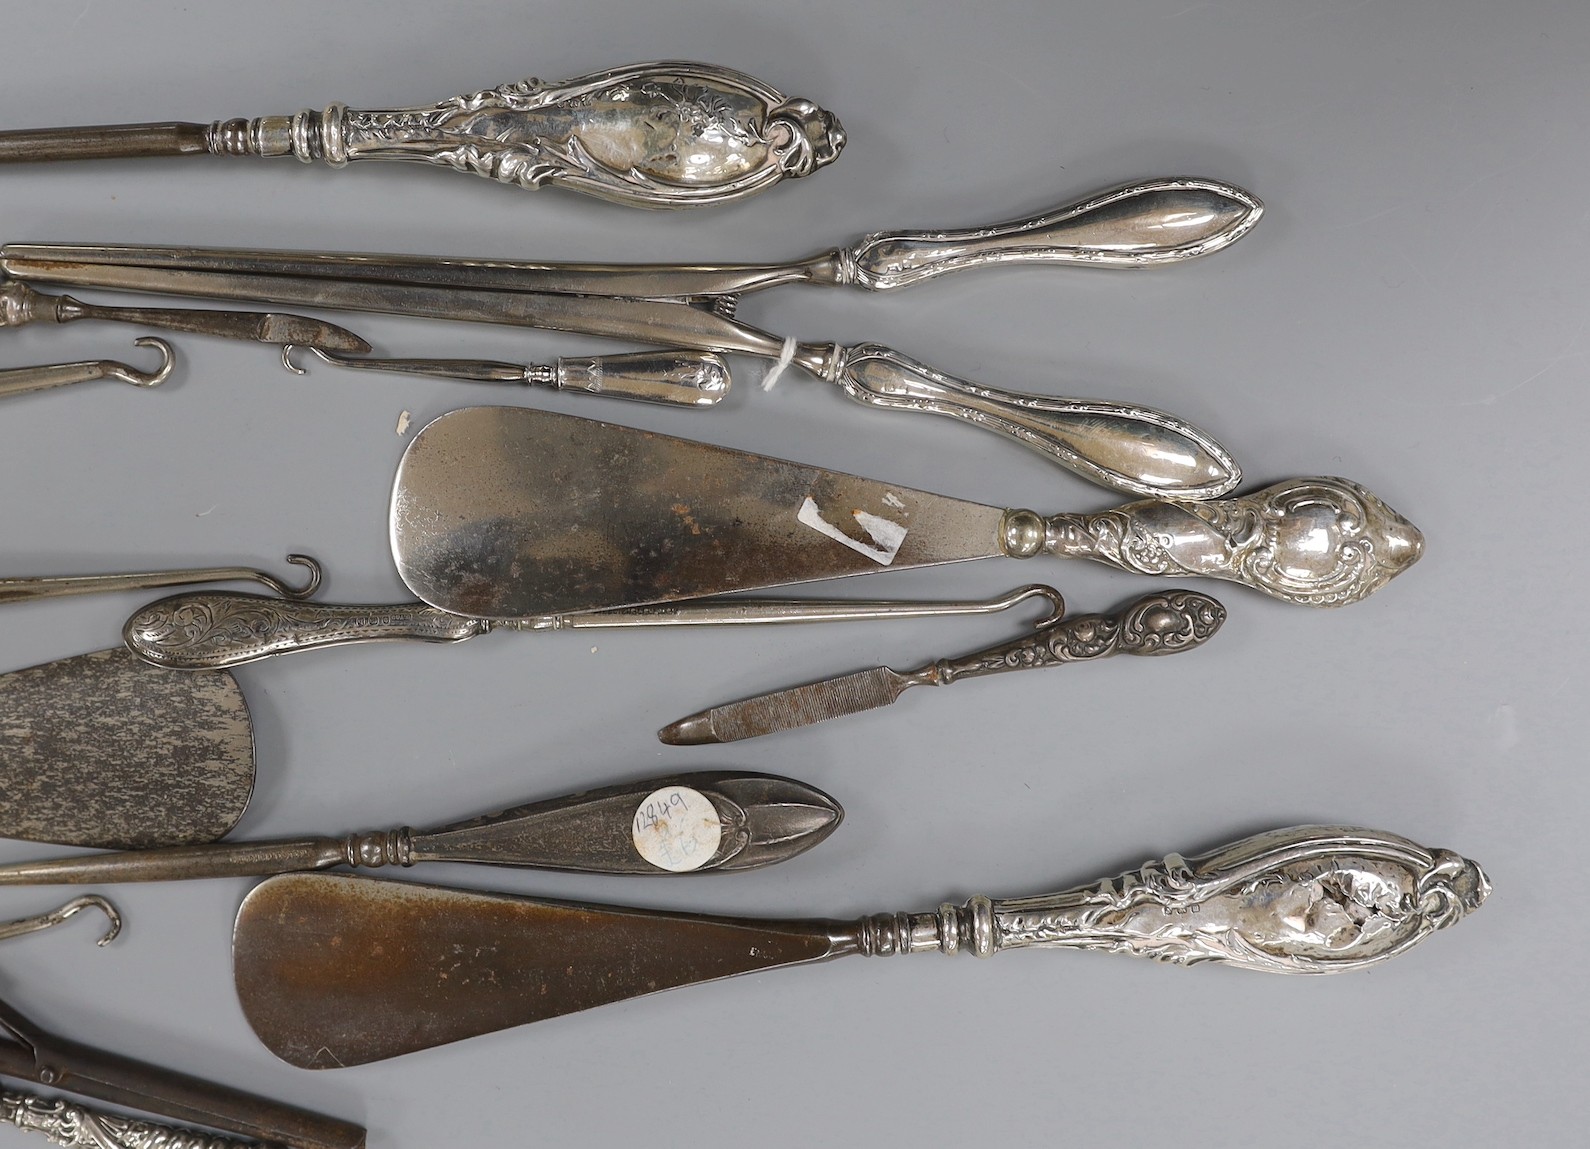 Four repousse silver handled shoe horns, seven similar button hooks, three nail implements, a pair glove stretchers and small pair of curling tongs.